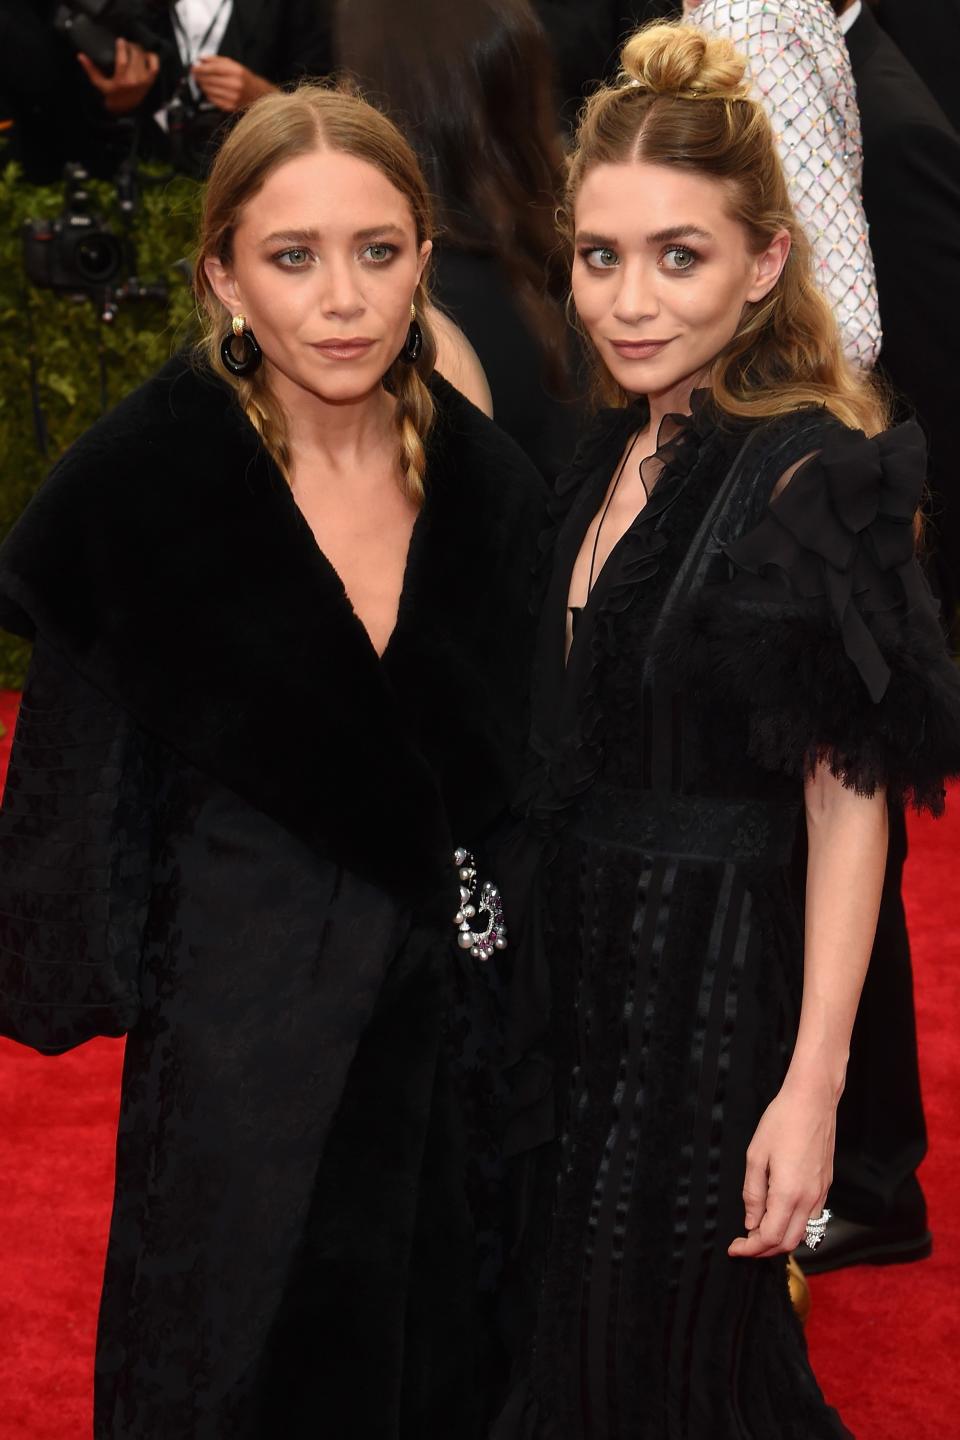 From playing Michelle Tanner on Full House to building a fashion empire, the sisters have experimented with ever-changing beauty looks on and off the screen.